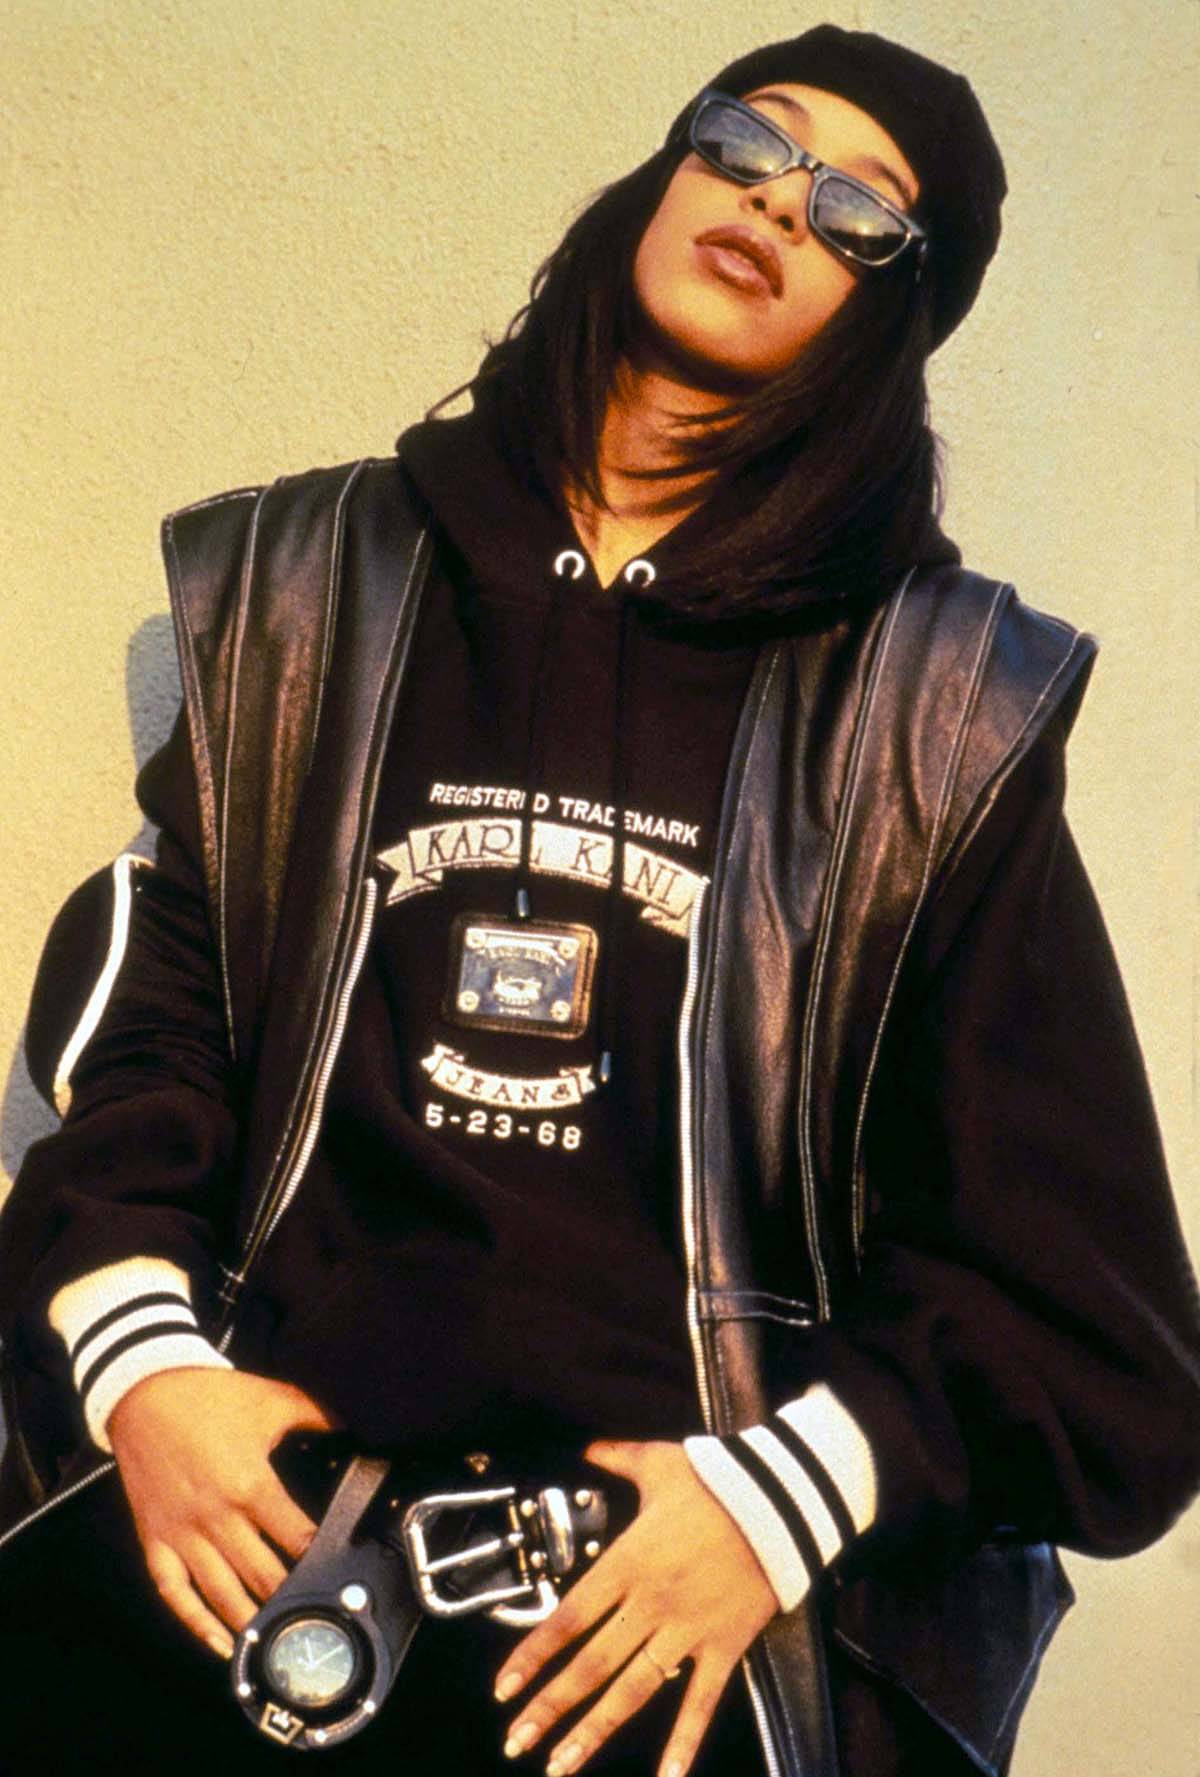 Crazy, Sexy, Cool - Even in her tomboy gear, Aaliyah had a confident allure. Rather than disappearing in the oversized jersey, shades and baggy jeans, there was mystery that drew fans in and made you want to know more. (GLOBE PHOTOS, INC)